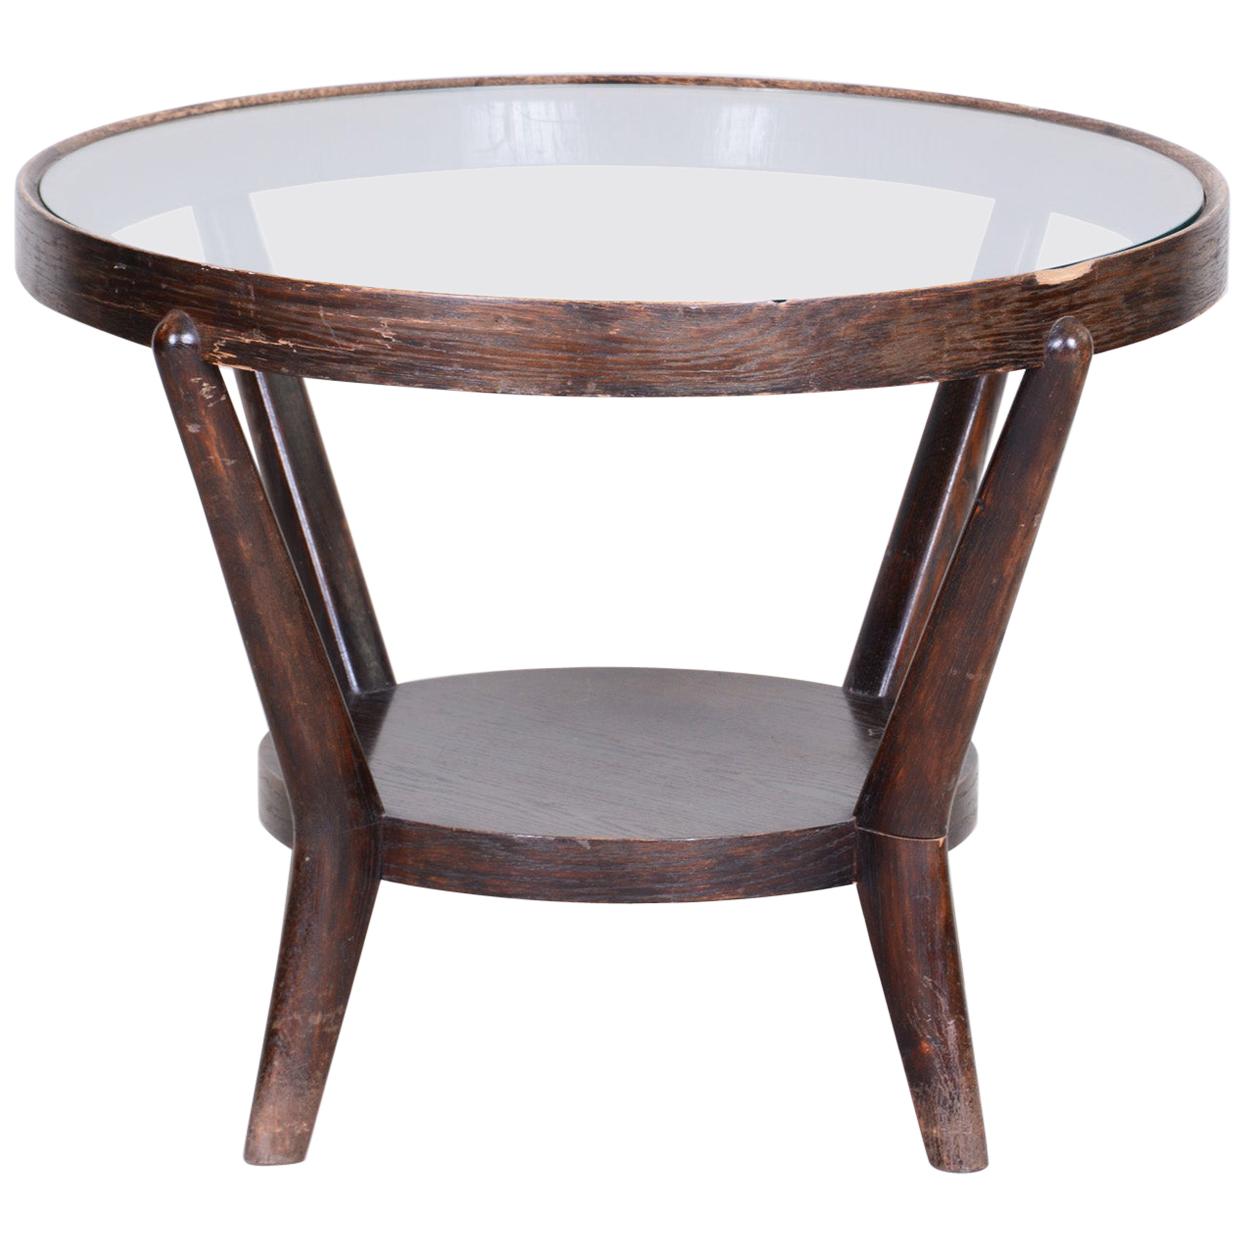 Small Brown Round Table, Czech Functionalism, Material Oak, Glass, 1940s